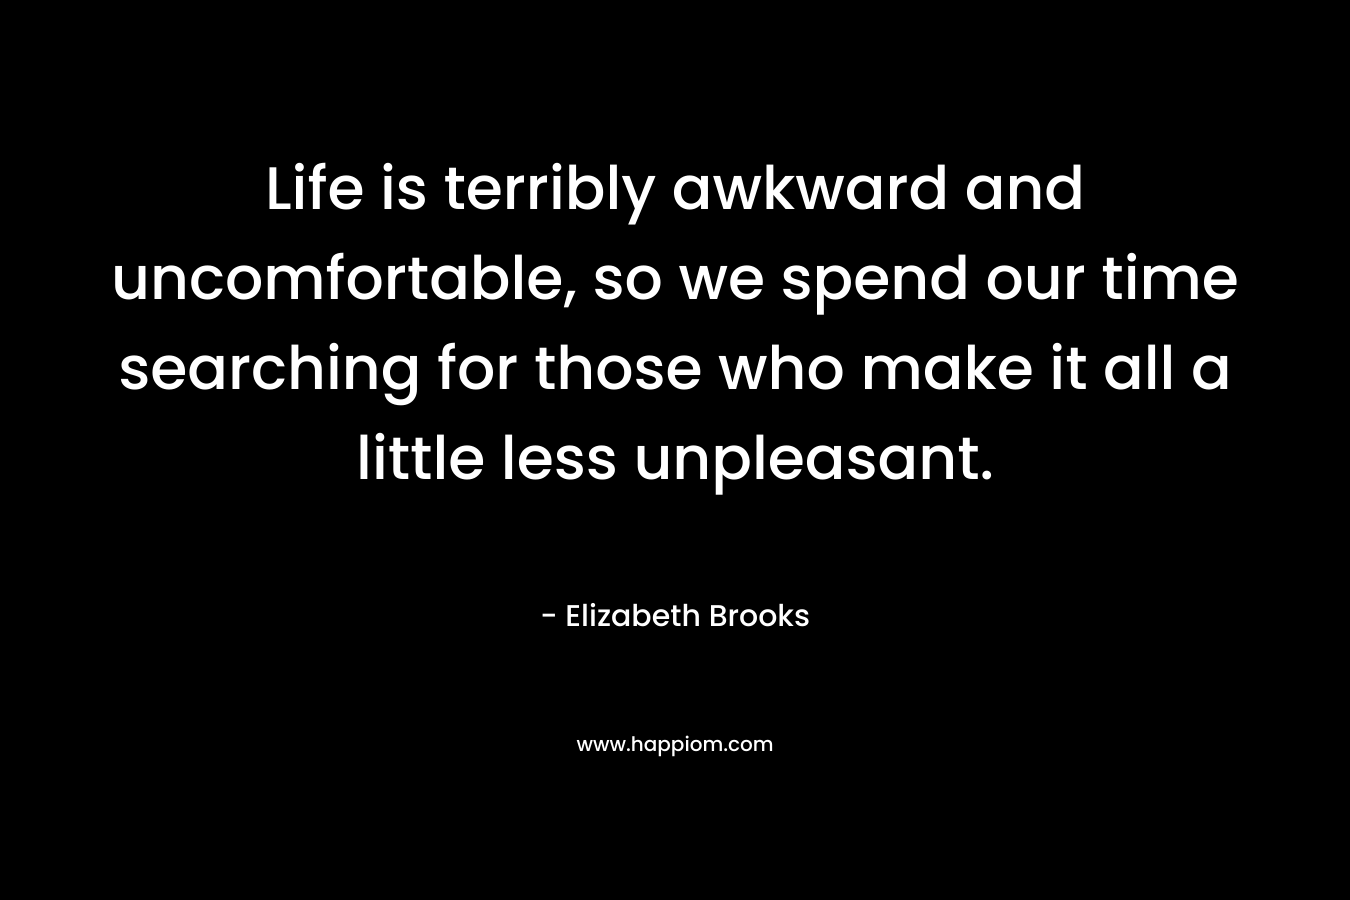 Life is terribly awkward and uncomfortable, so we spend our time searching for those who make it all a little less unpleasant.